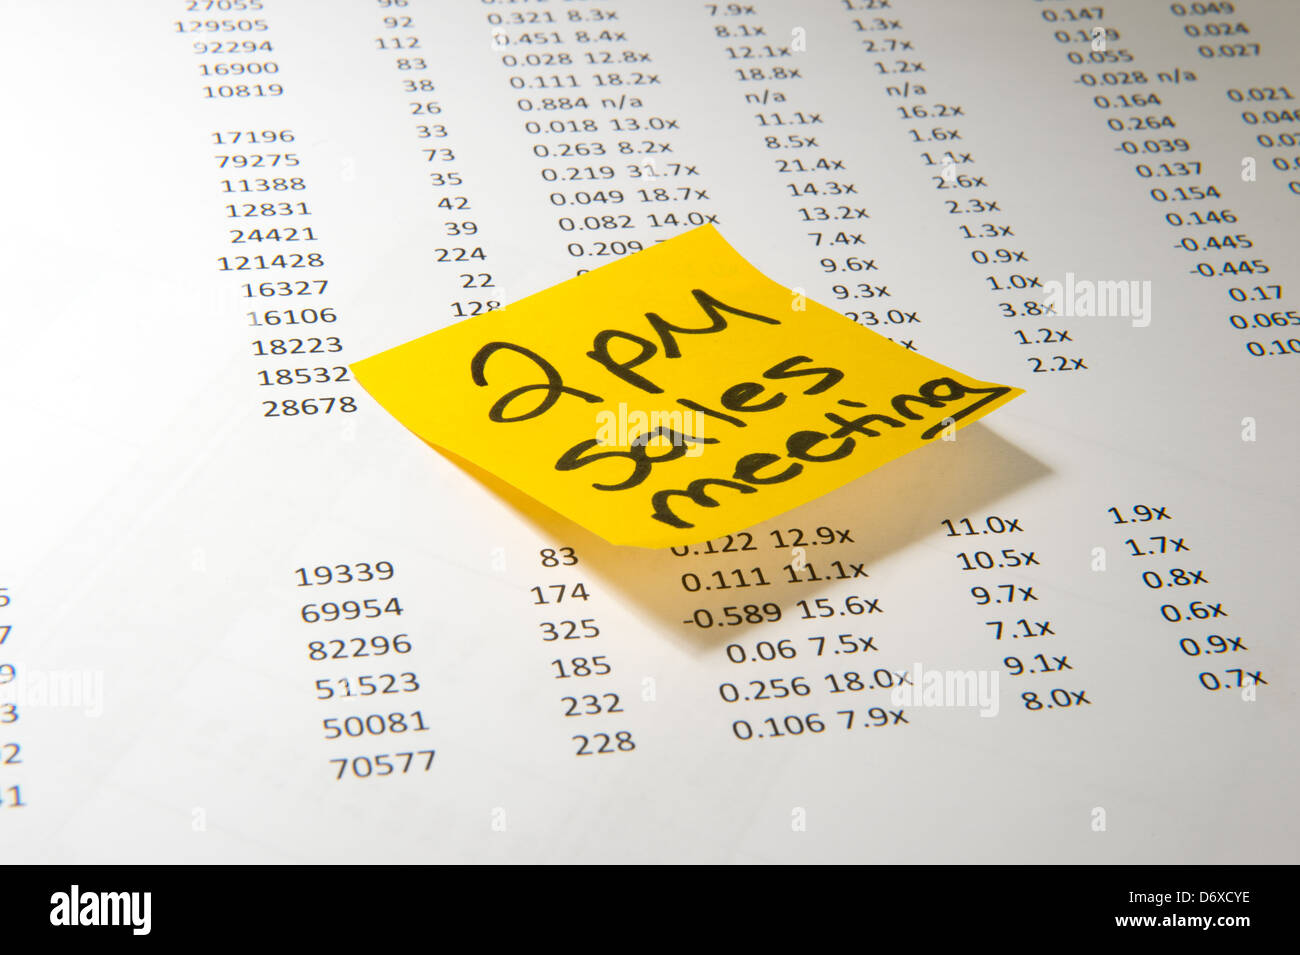 Sticky note on spreadsheet reminder of sales meeting at 2pm Stock Photo